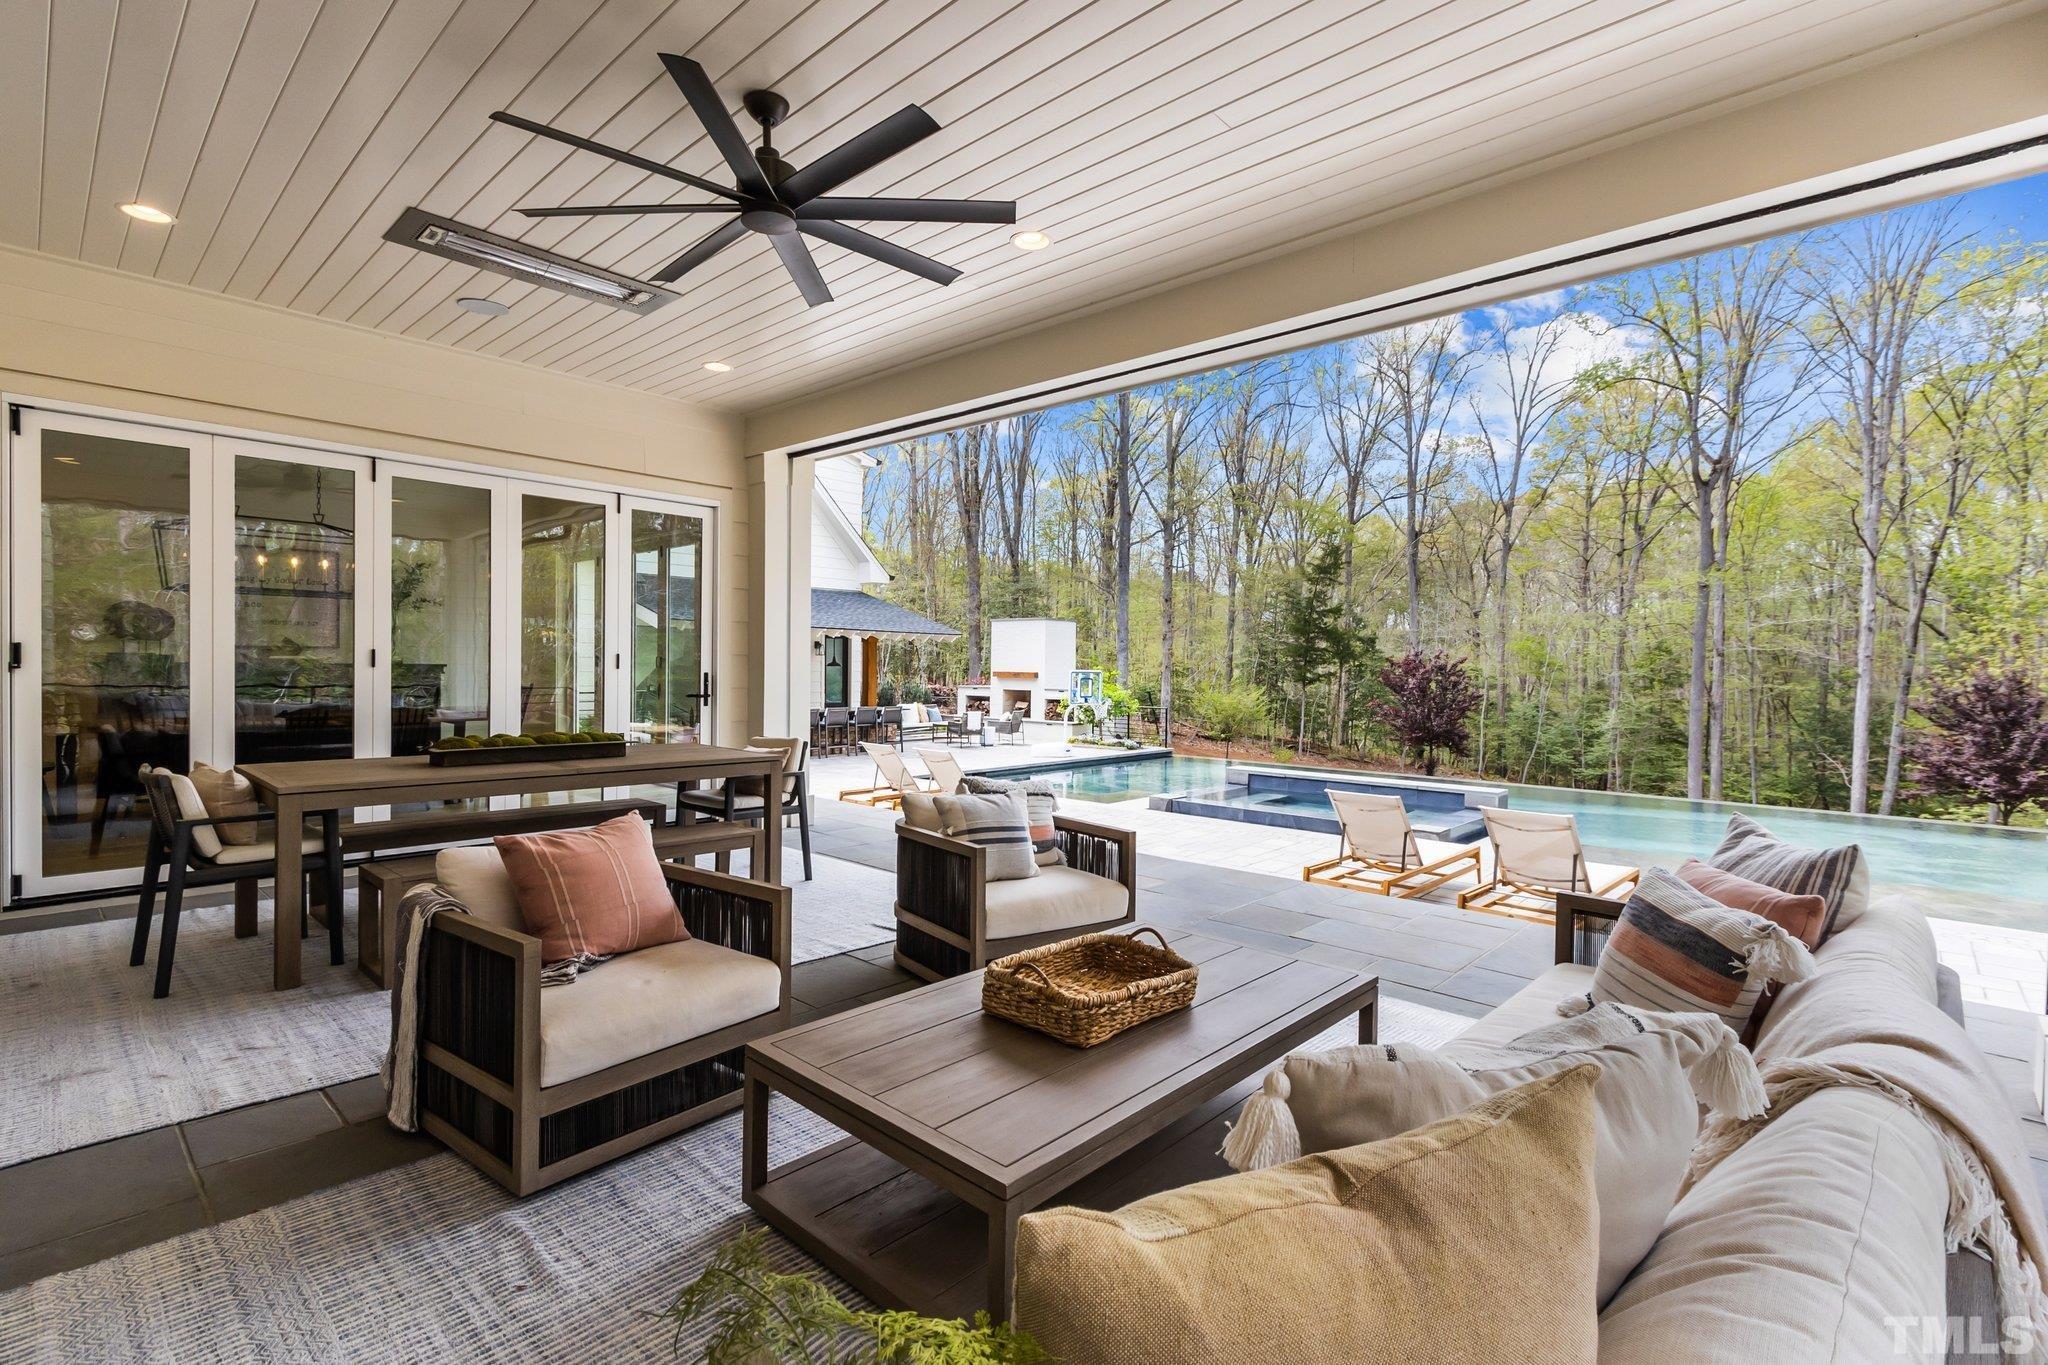 The special doors to the screened porch from both the dining room and the living room open accordion style so they effectively disappear making it not only an open floor plan but like living outdoors while you are indoors.